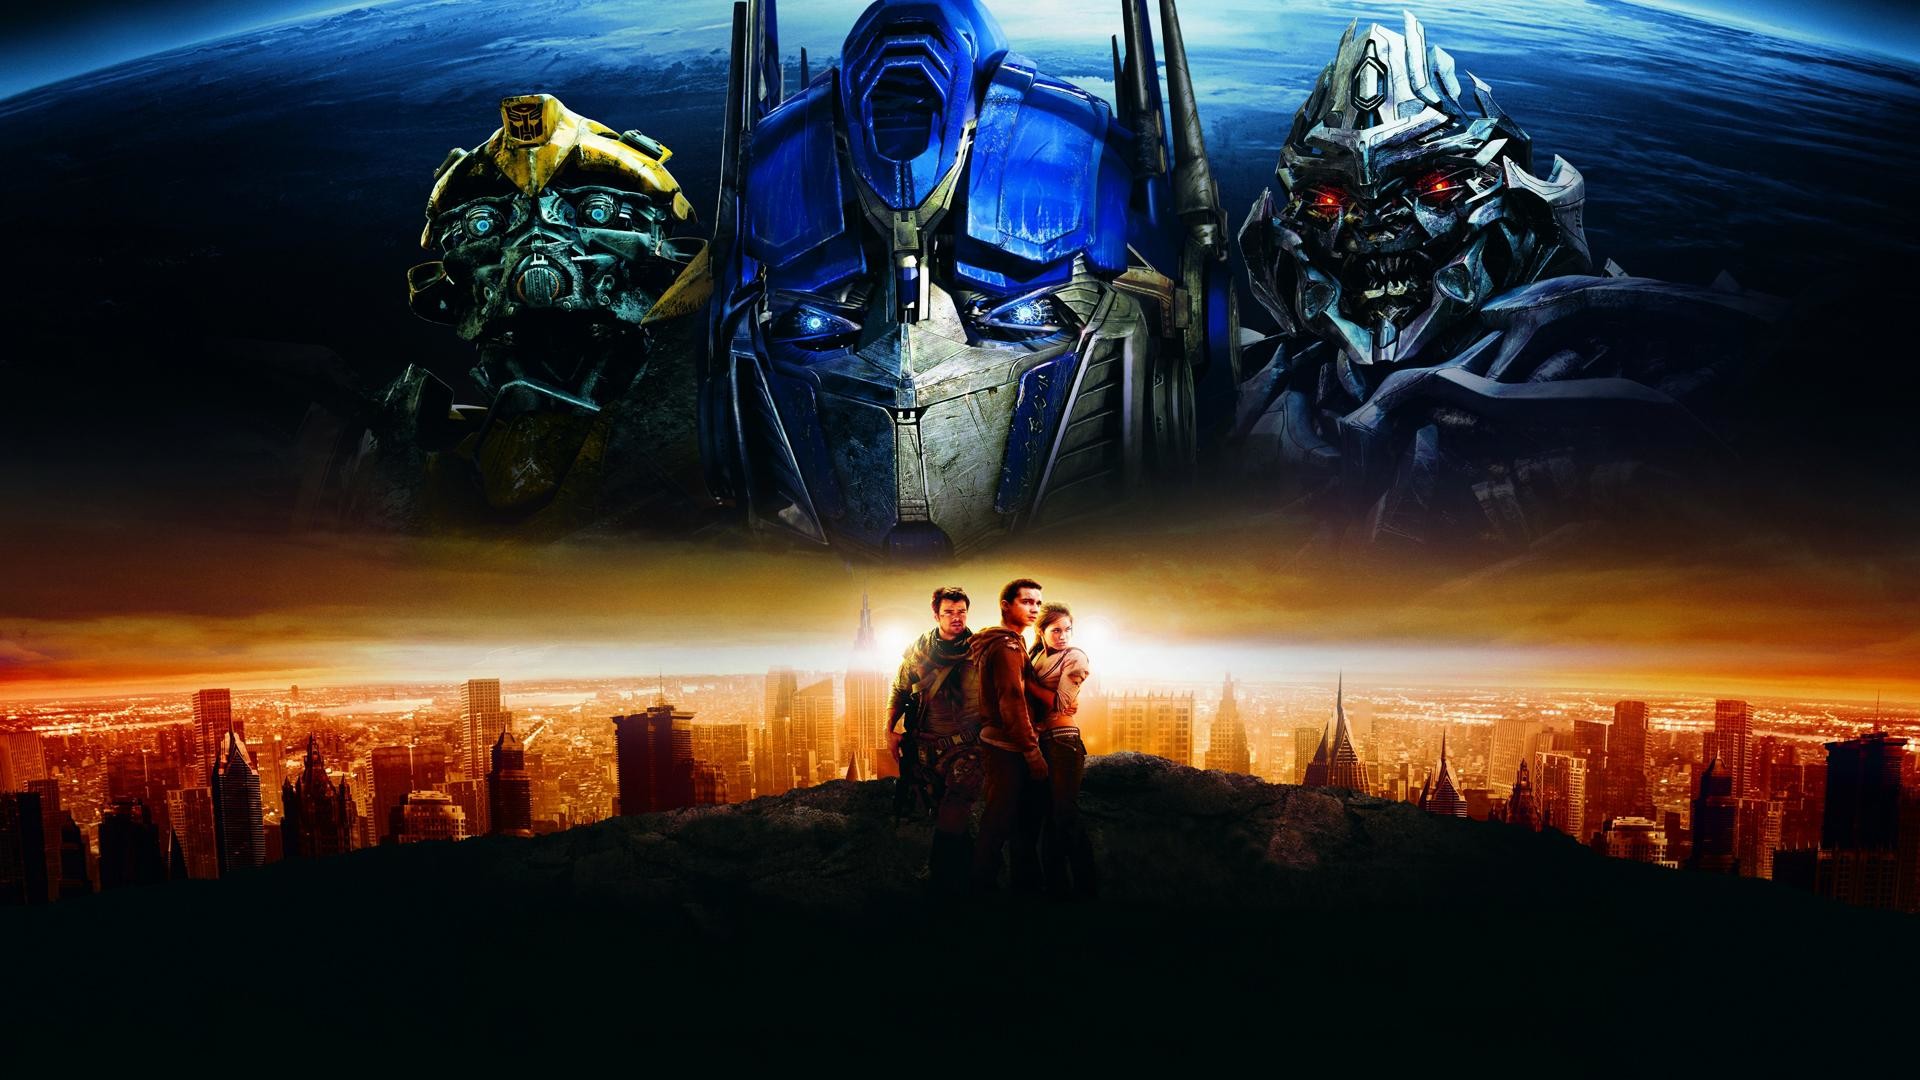 1920x1080 Transformers-Wallpapers-HD-Free-Download